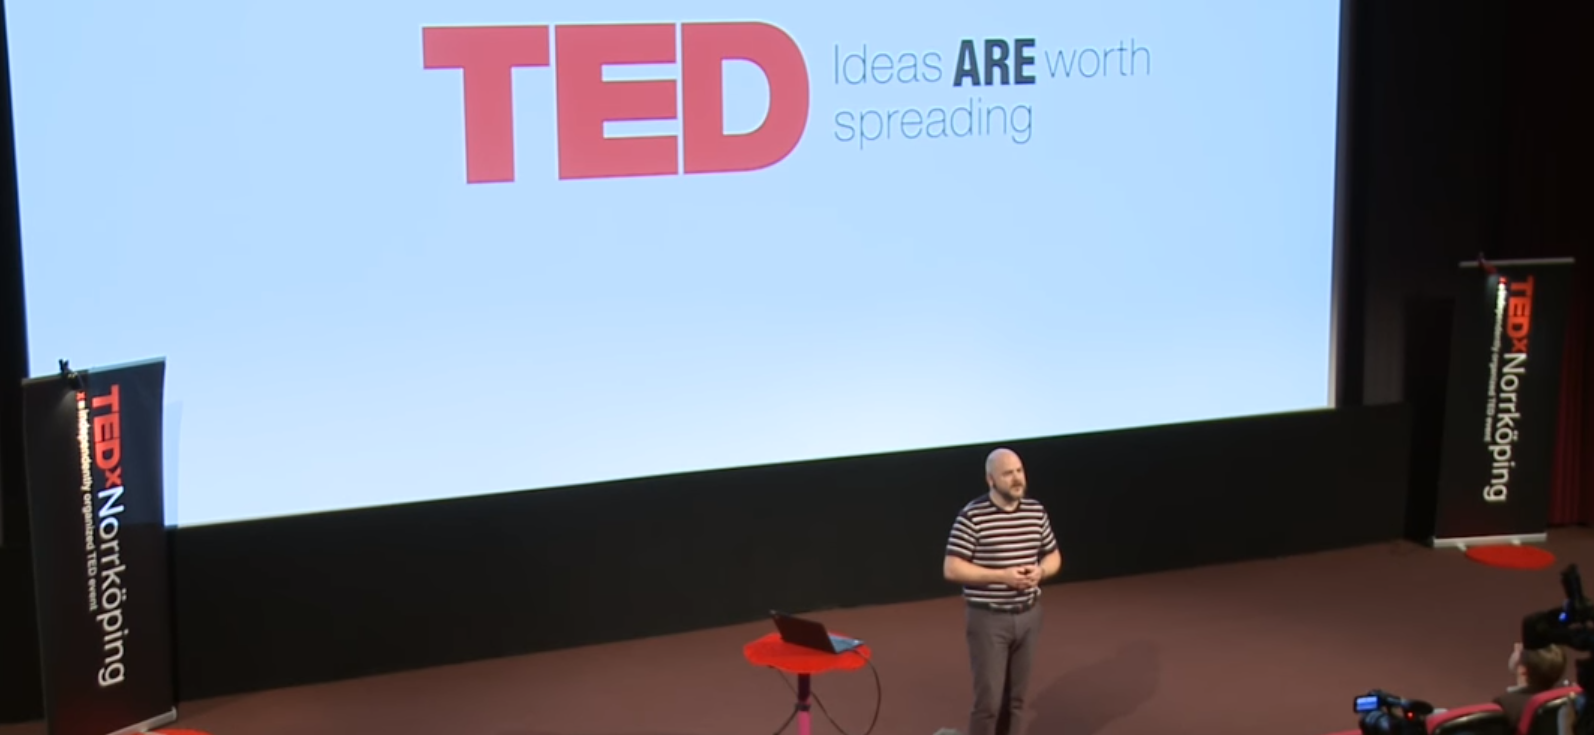 💡 My TEDx talk: Why ideas are worth spreading